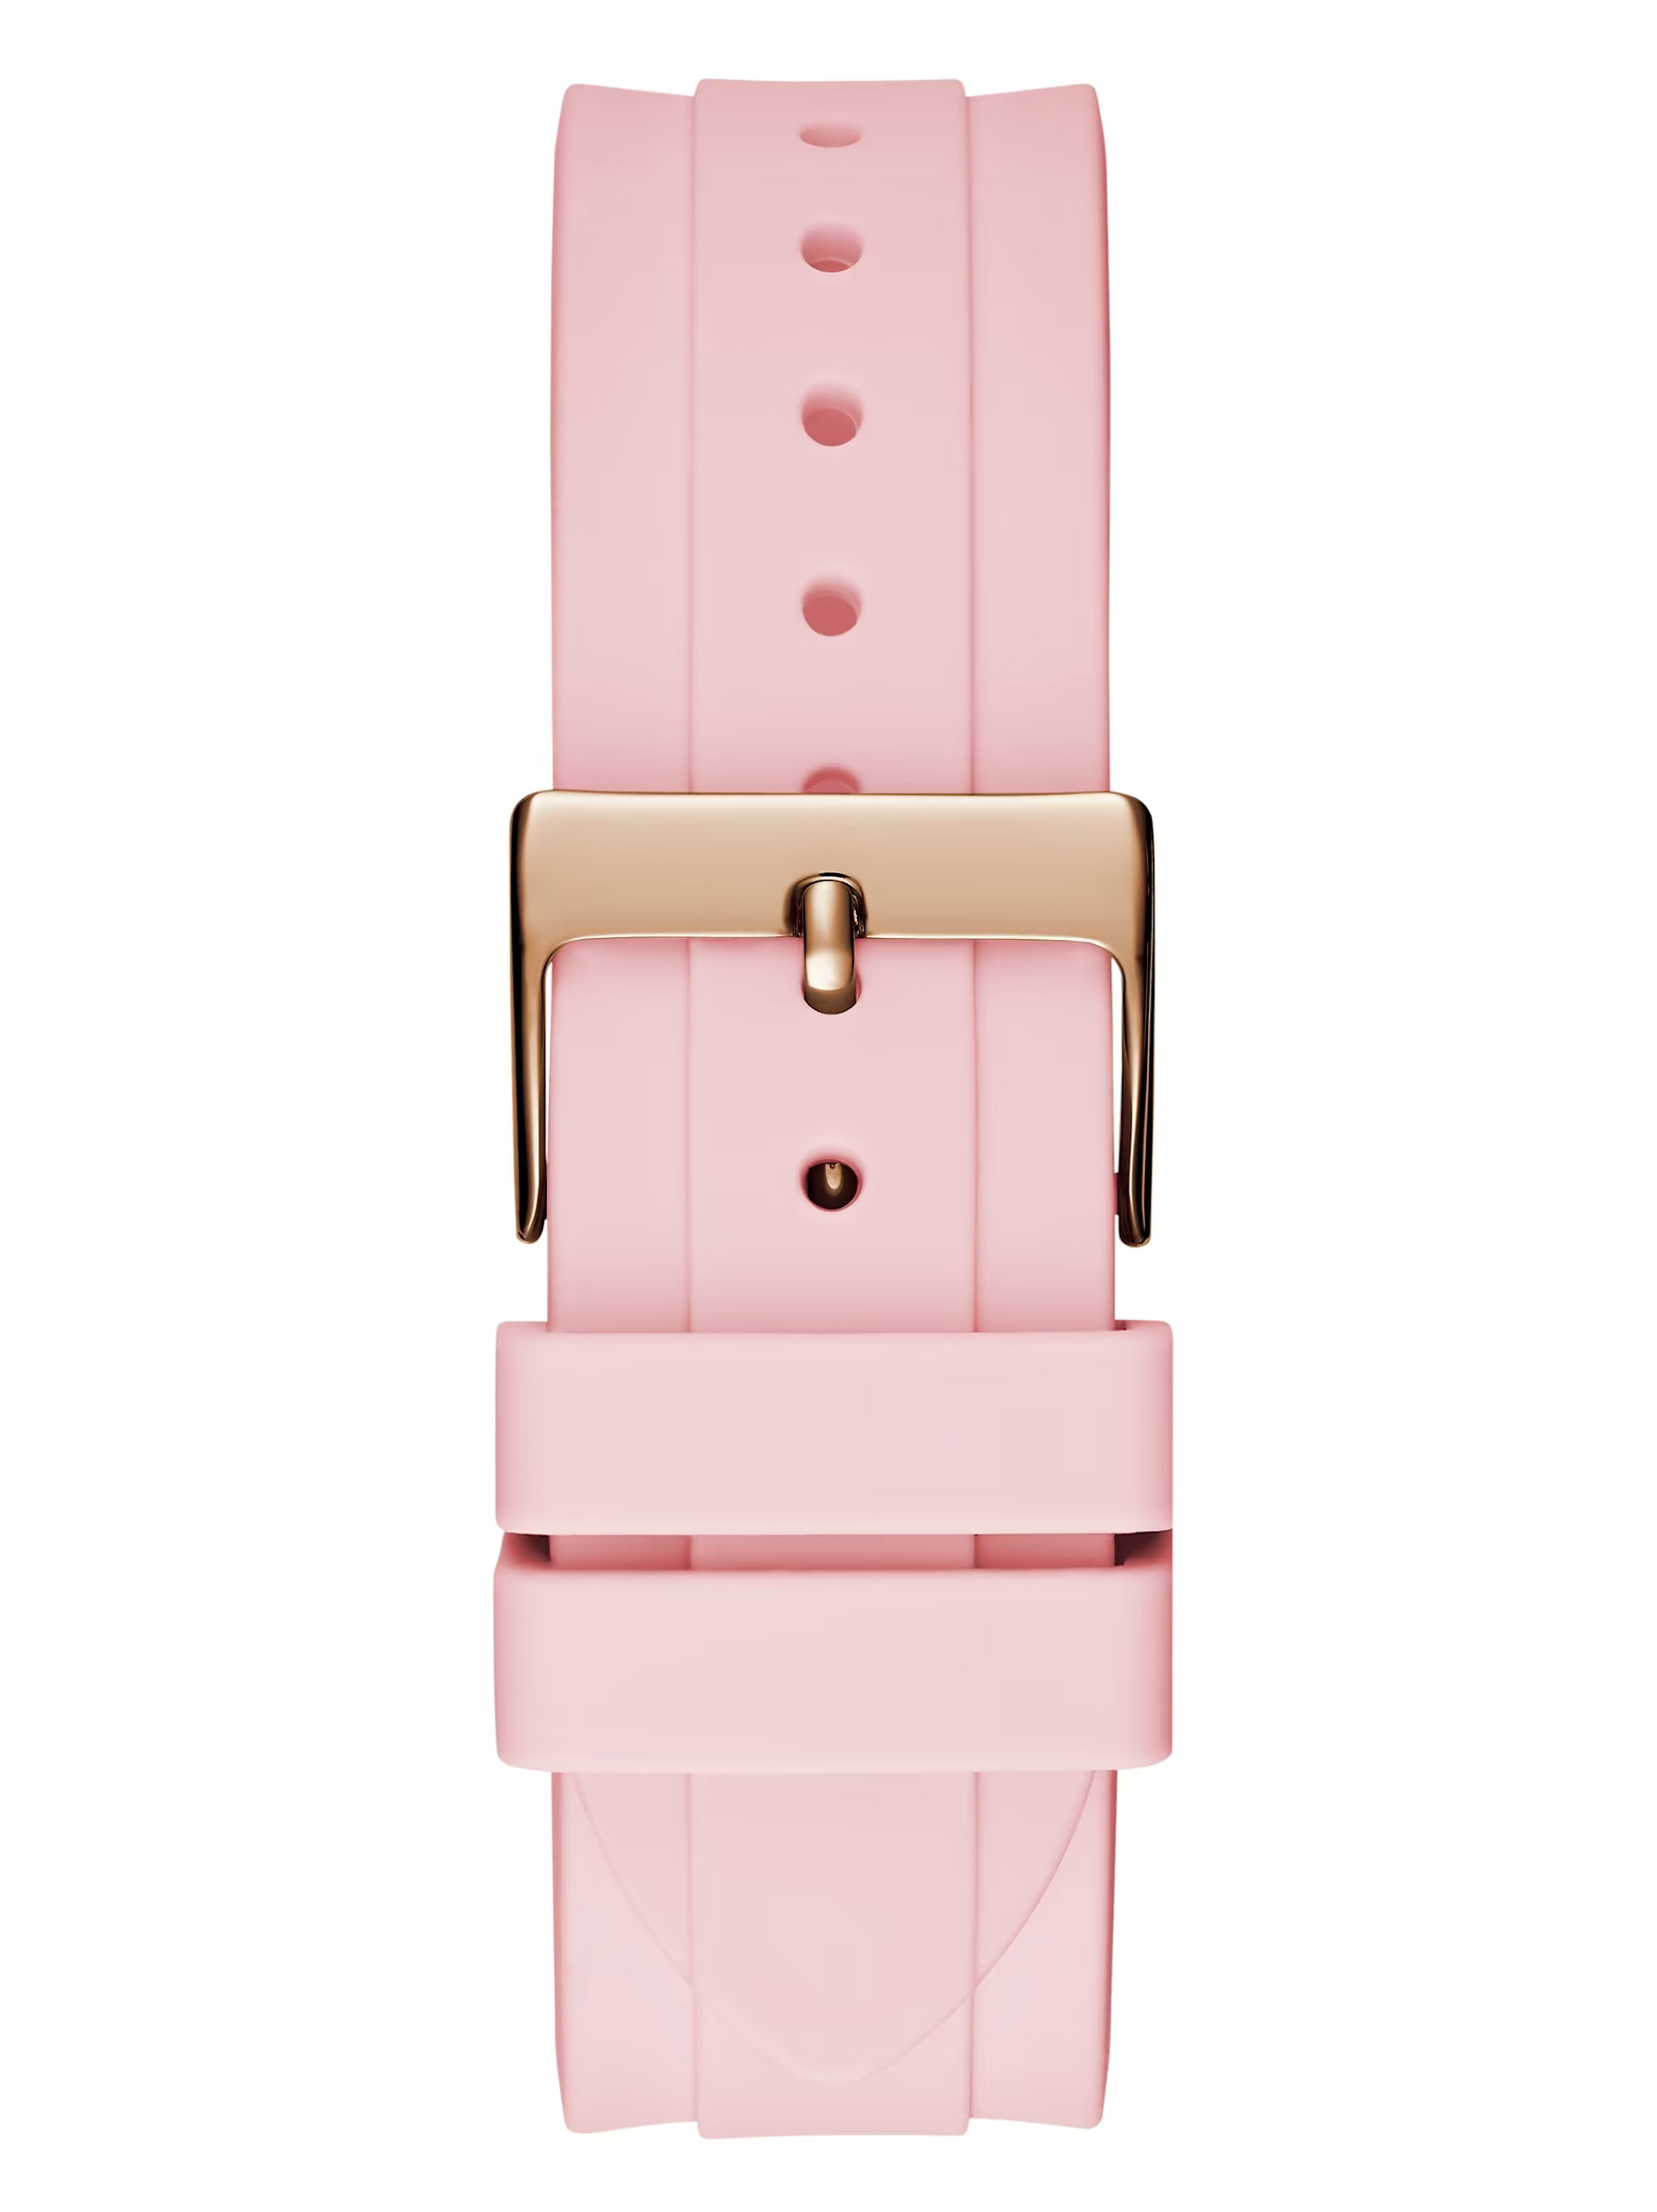 ĐỒNG HỒ ĐEO TAY NỮ GUESS LADIES SPARKLING PINK LIMITED EDITION WATCH GW0032L4 8